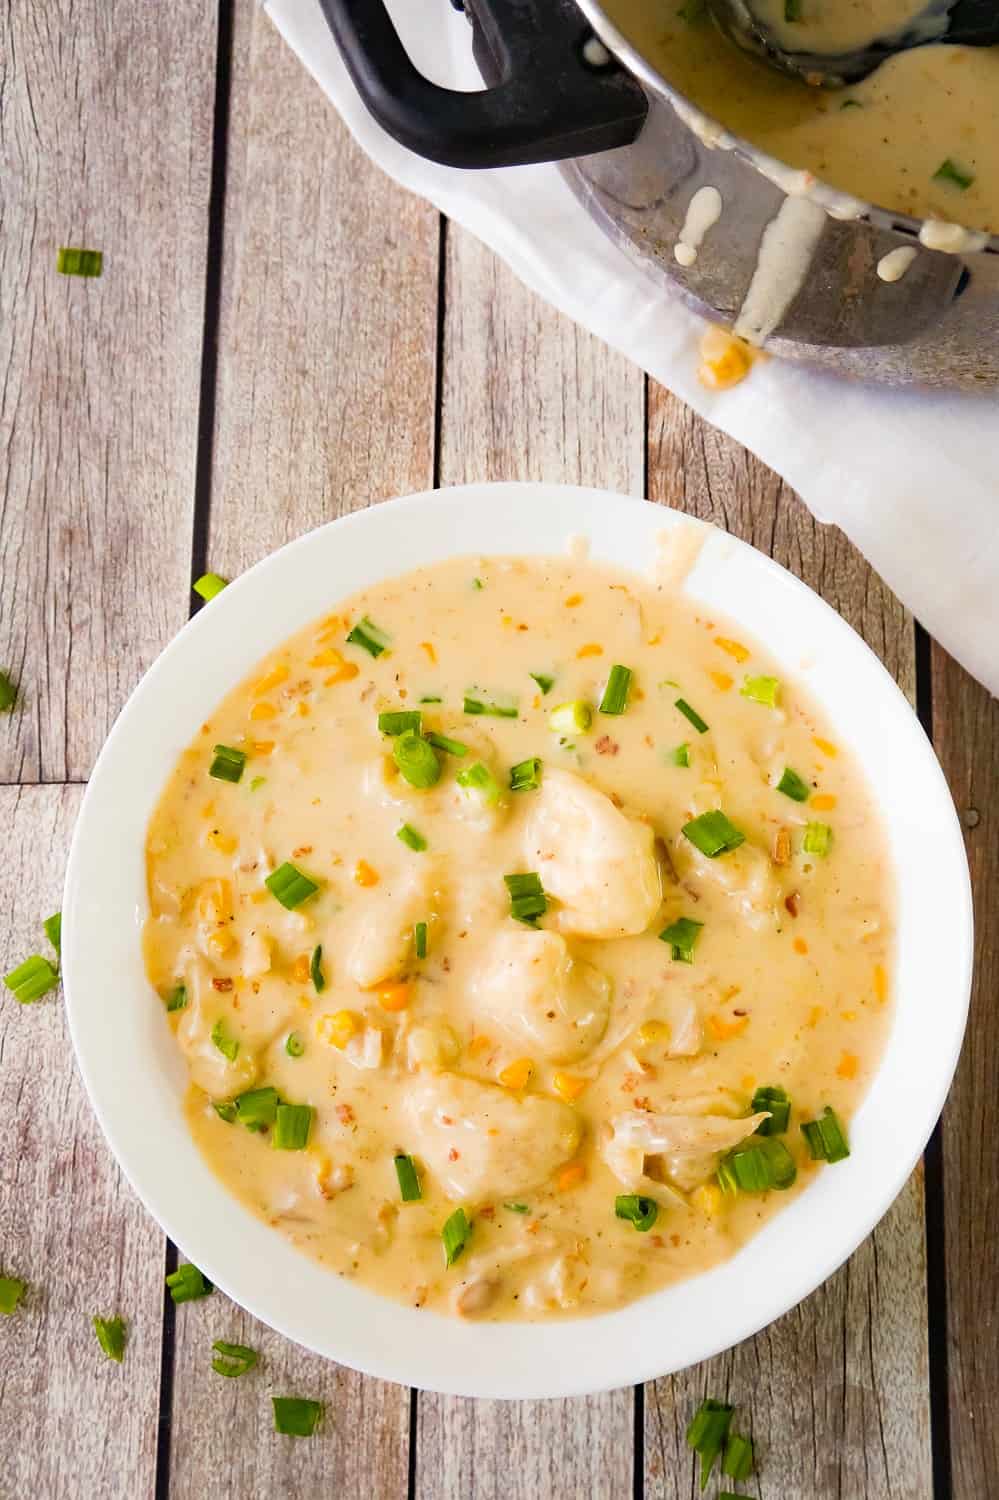 Cajun Chicken and Dumplings with Bacon are an easy chicken dinner recipe using Pillsbury refrigerated biscuits. This thick and creamy dish is loaded with rotisserie chicken, corn, real bacon bits and seasoned with Clubhouse Cajun spice for a bit of a kick.